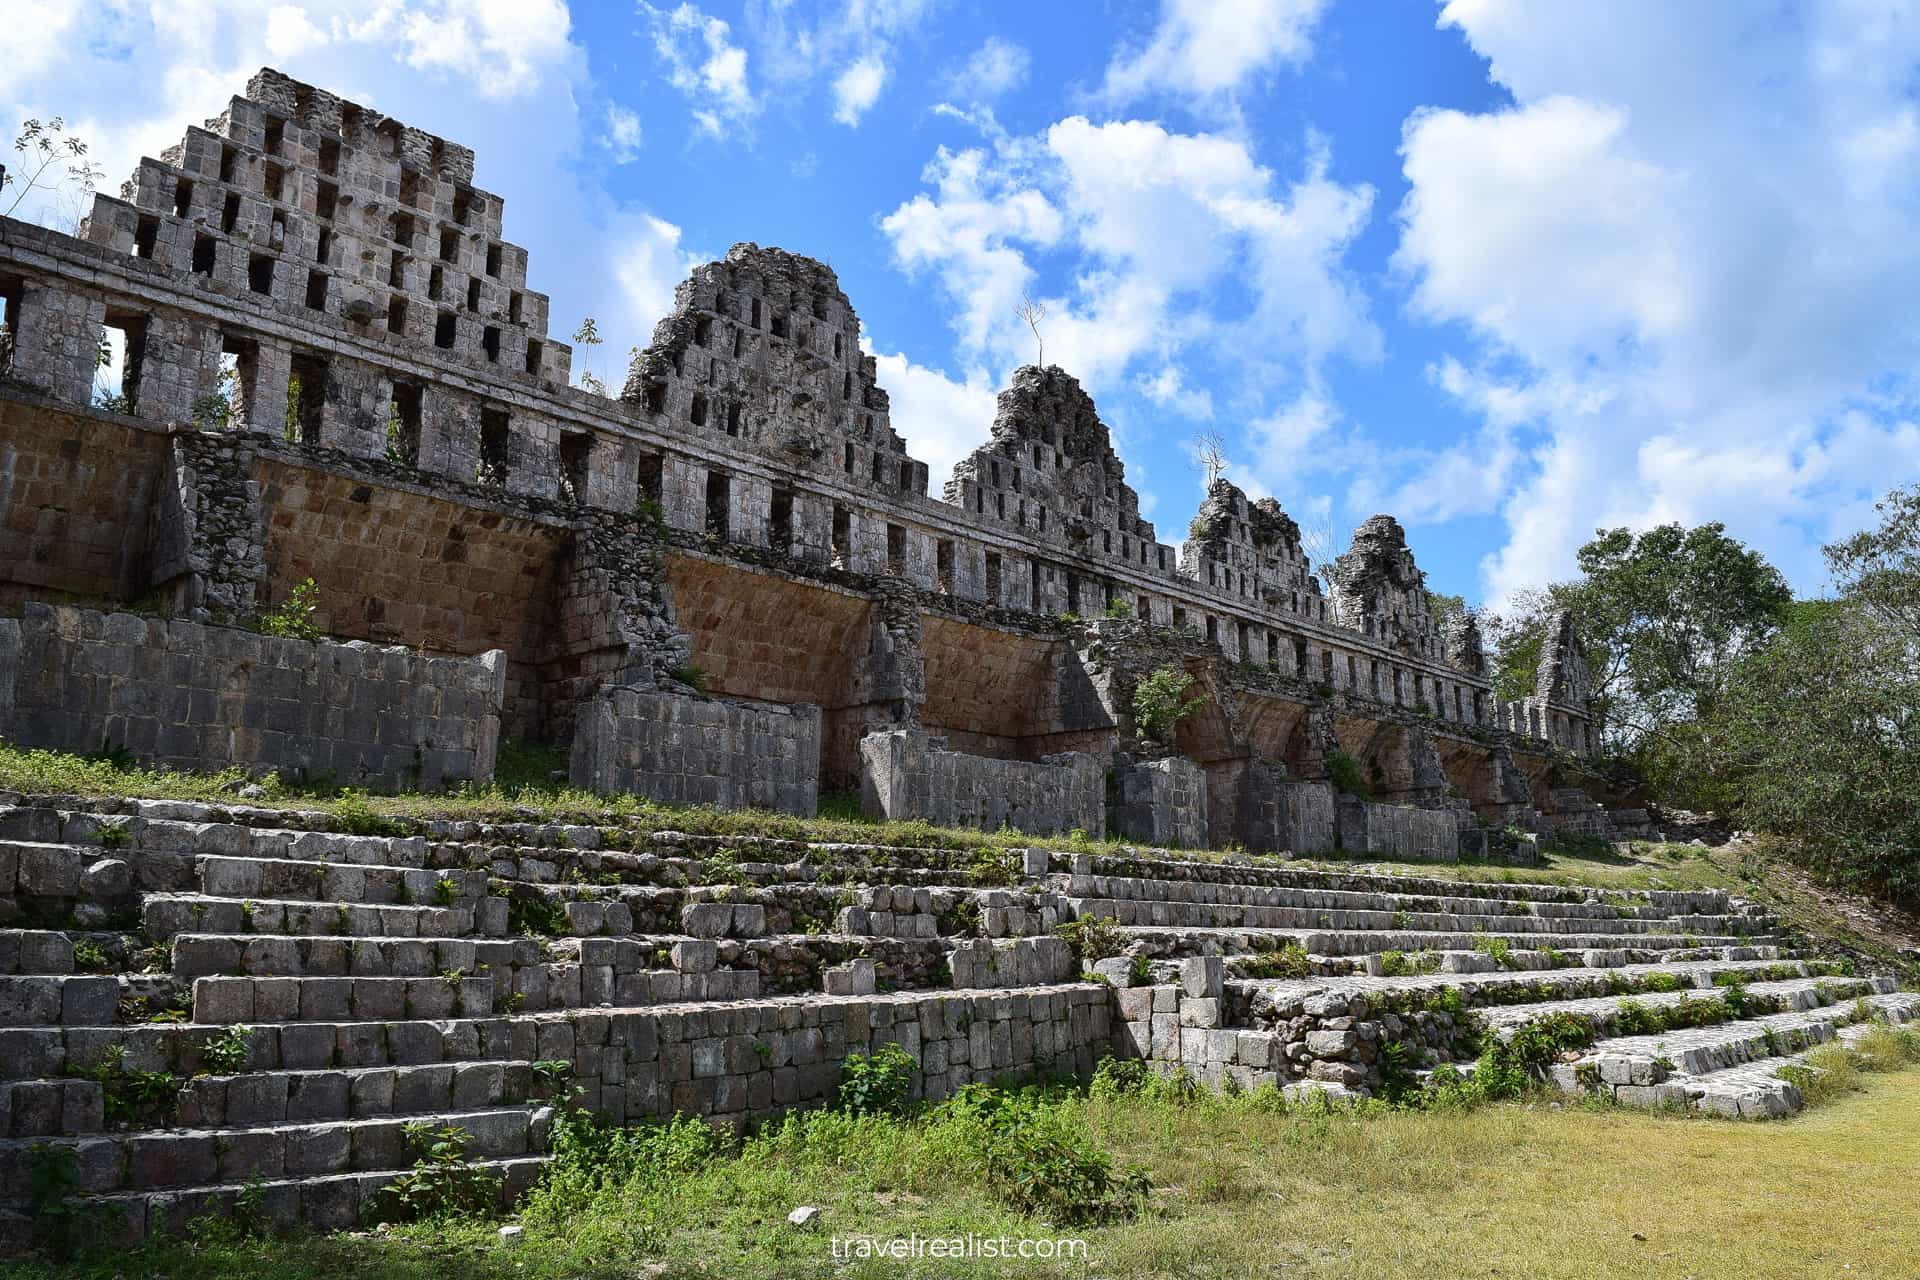 House of the Doves in Uxmal, Mexico